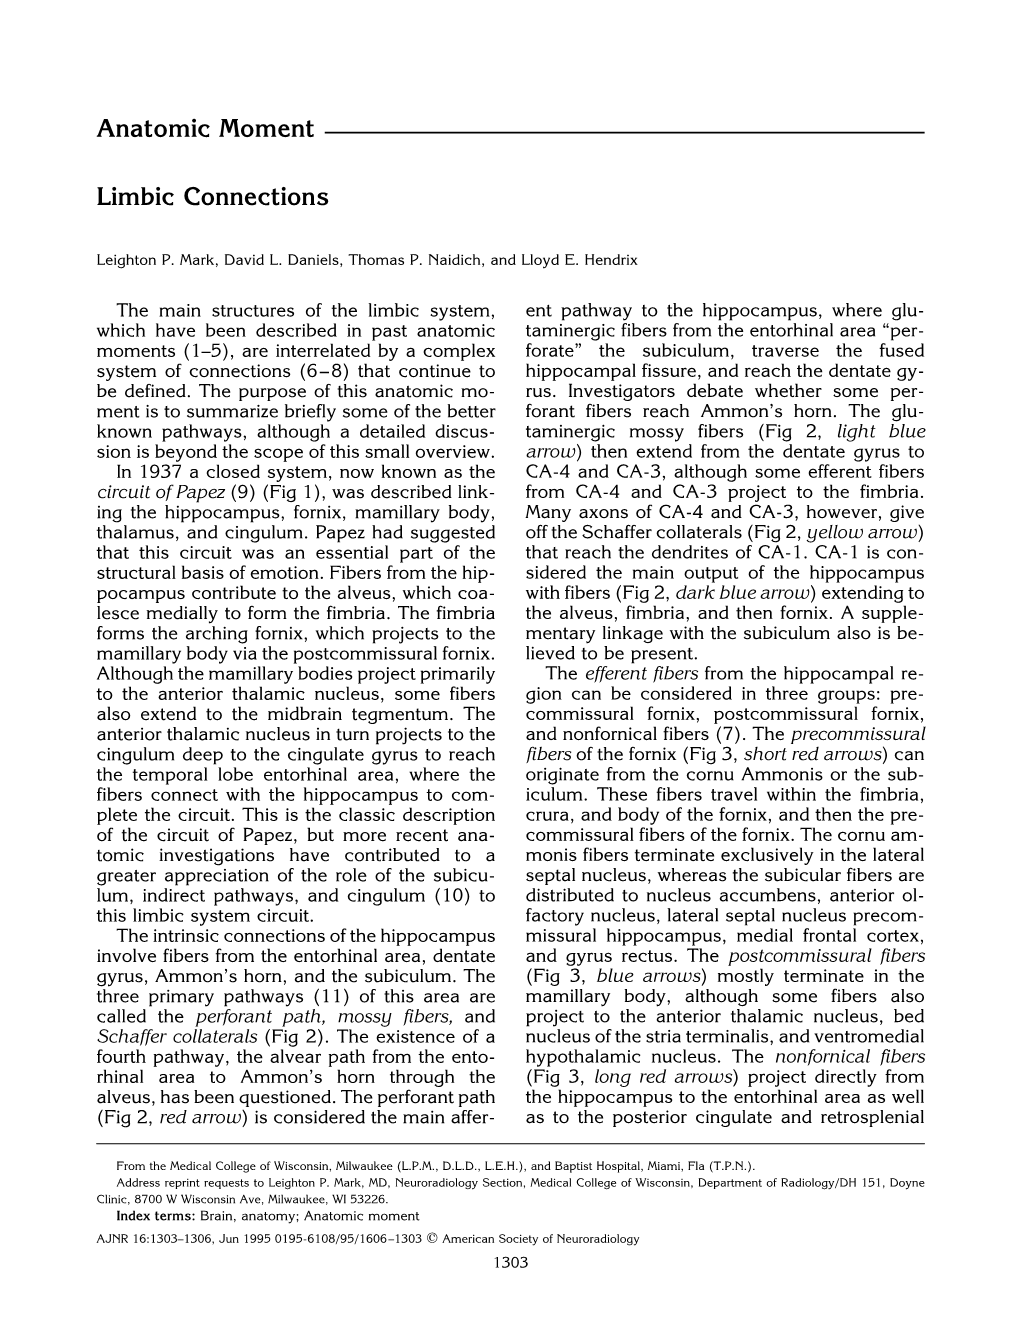 Limbic Connections, Anatomic Moment